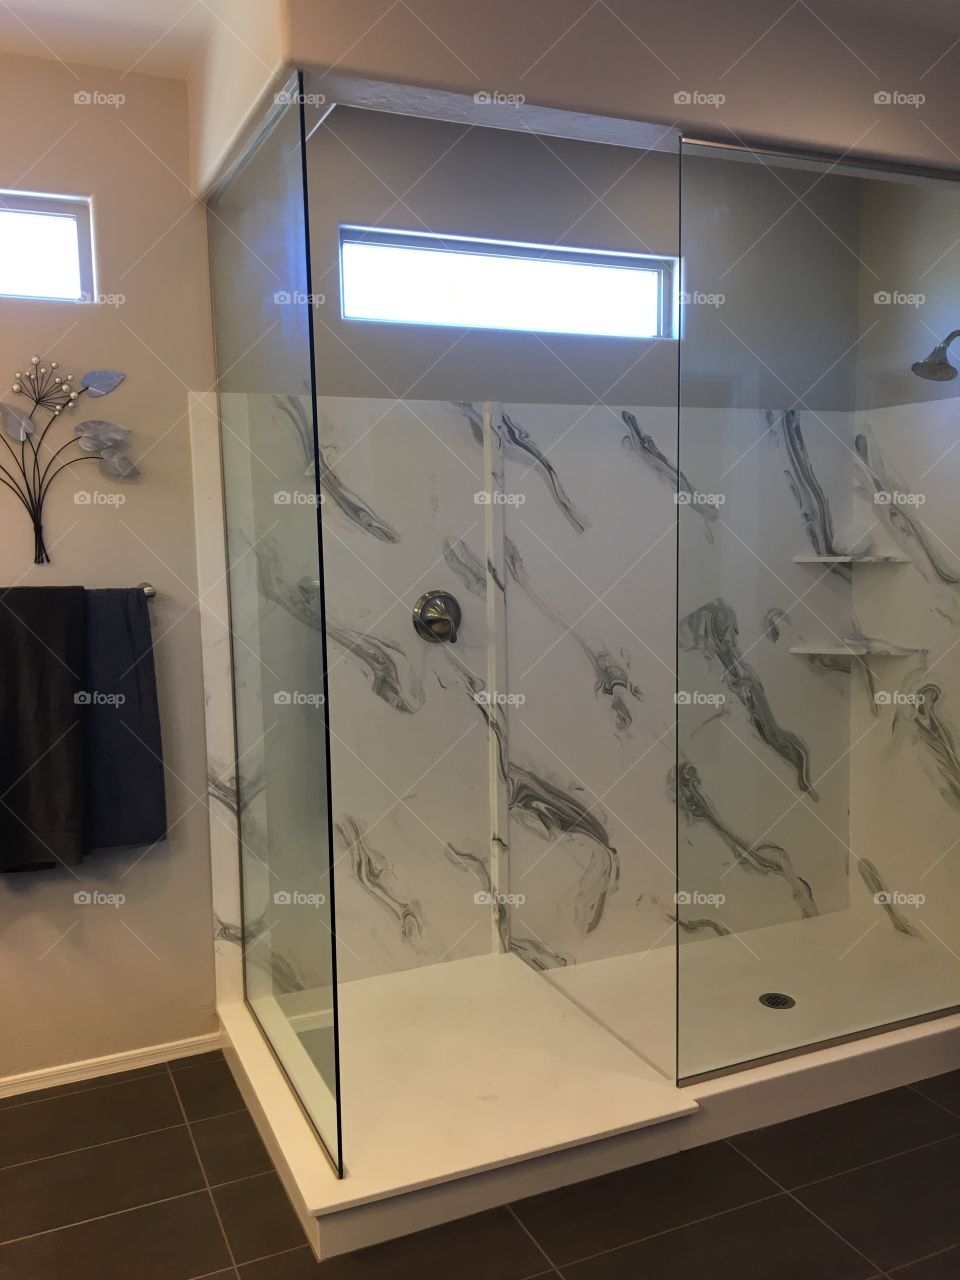 Clean shower glass